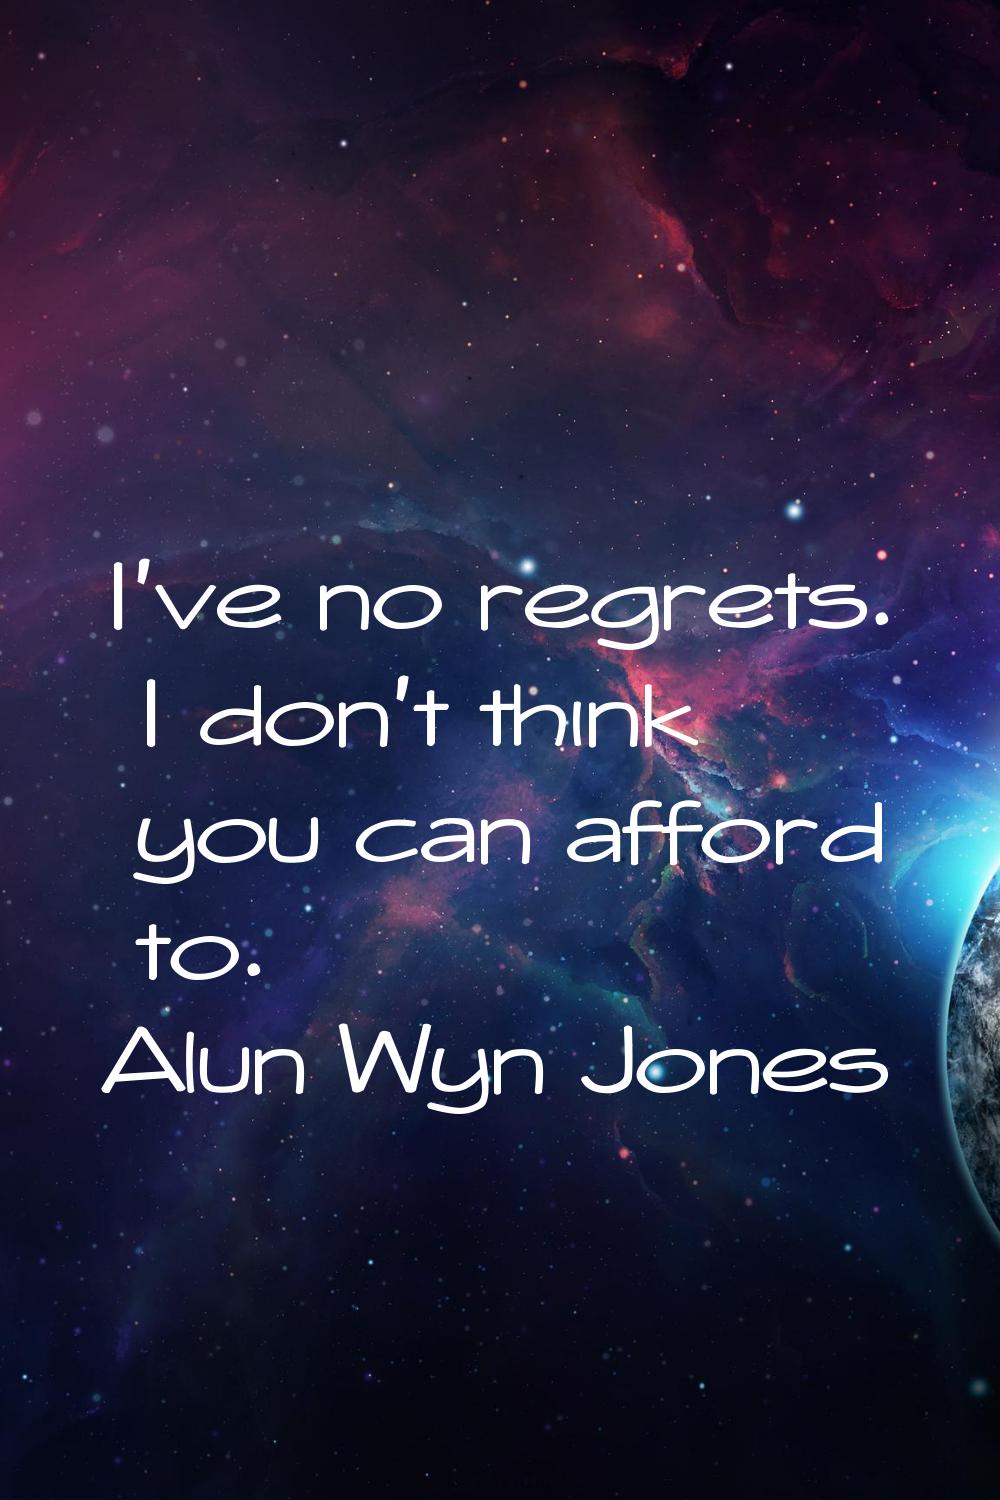 I've no regrets. I don't think you can afford to.